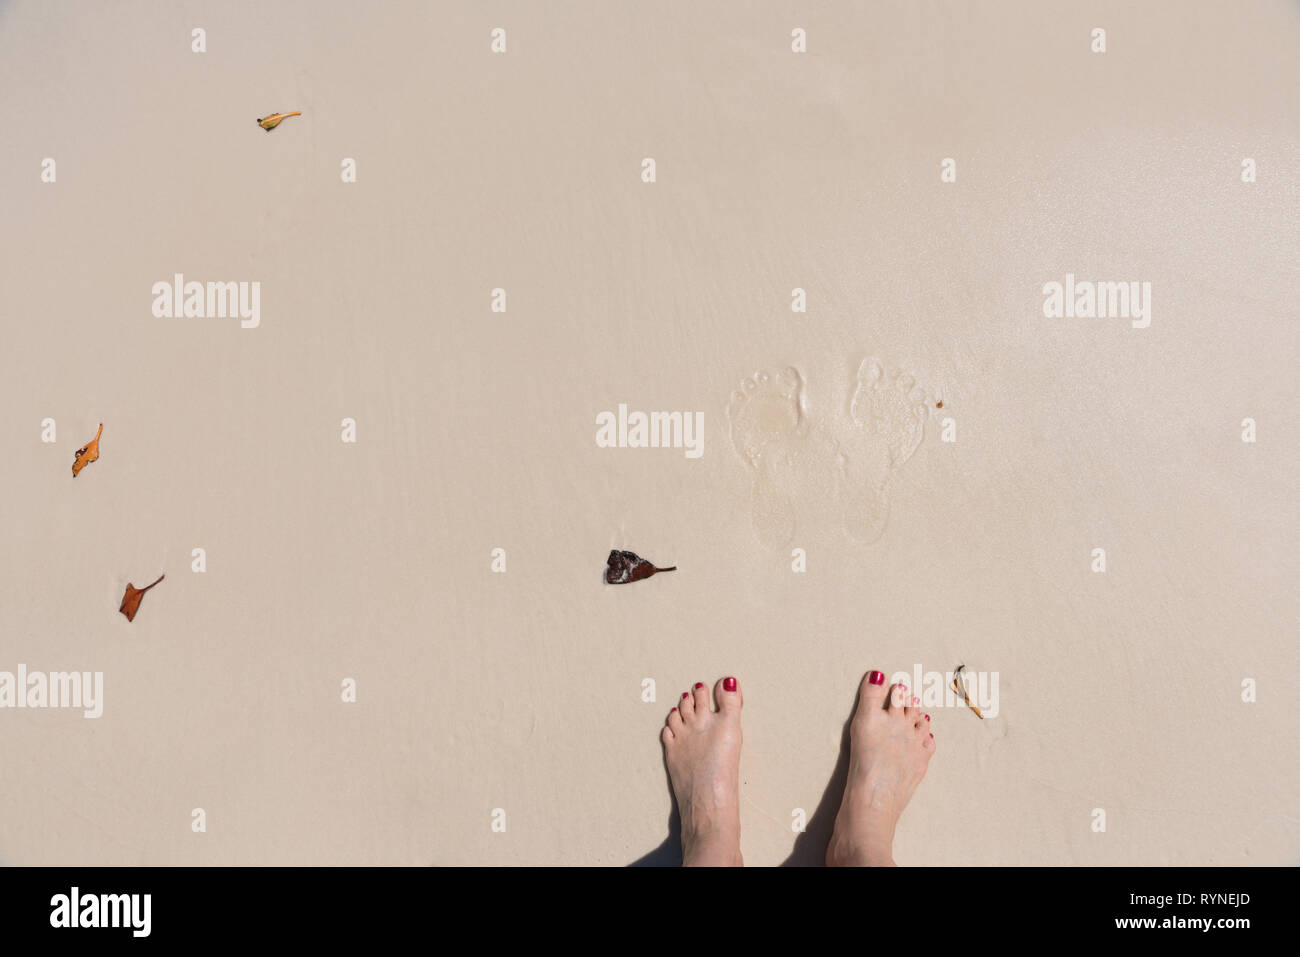 Footprints and feet with painted toenails on beach background Stock Photo